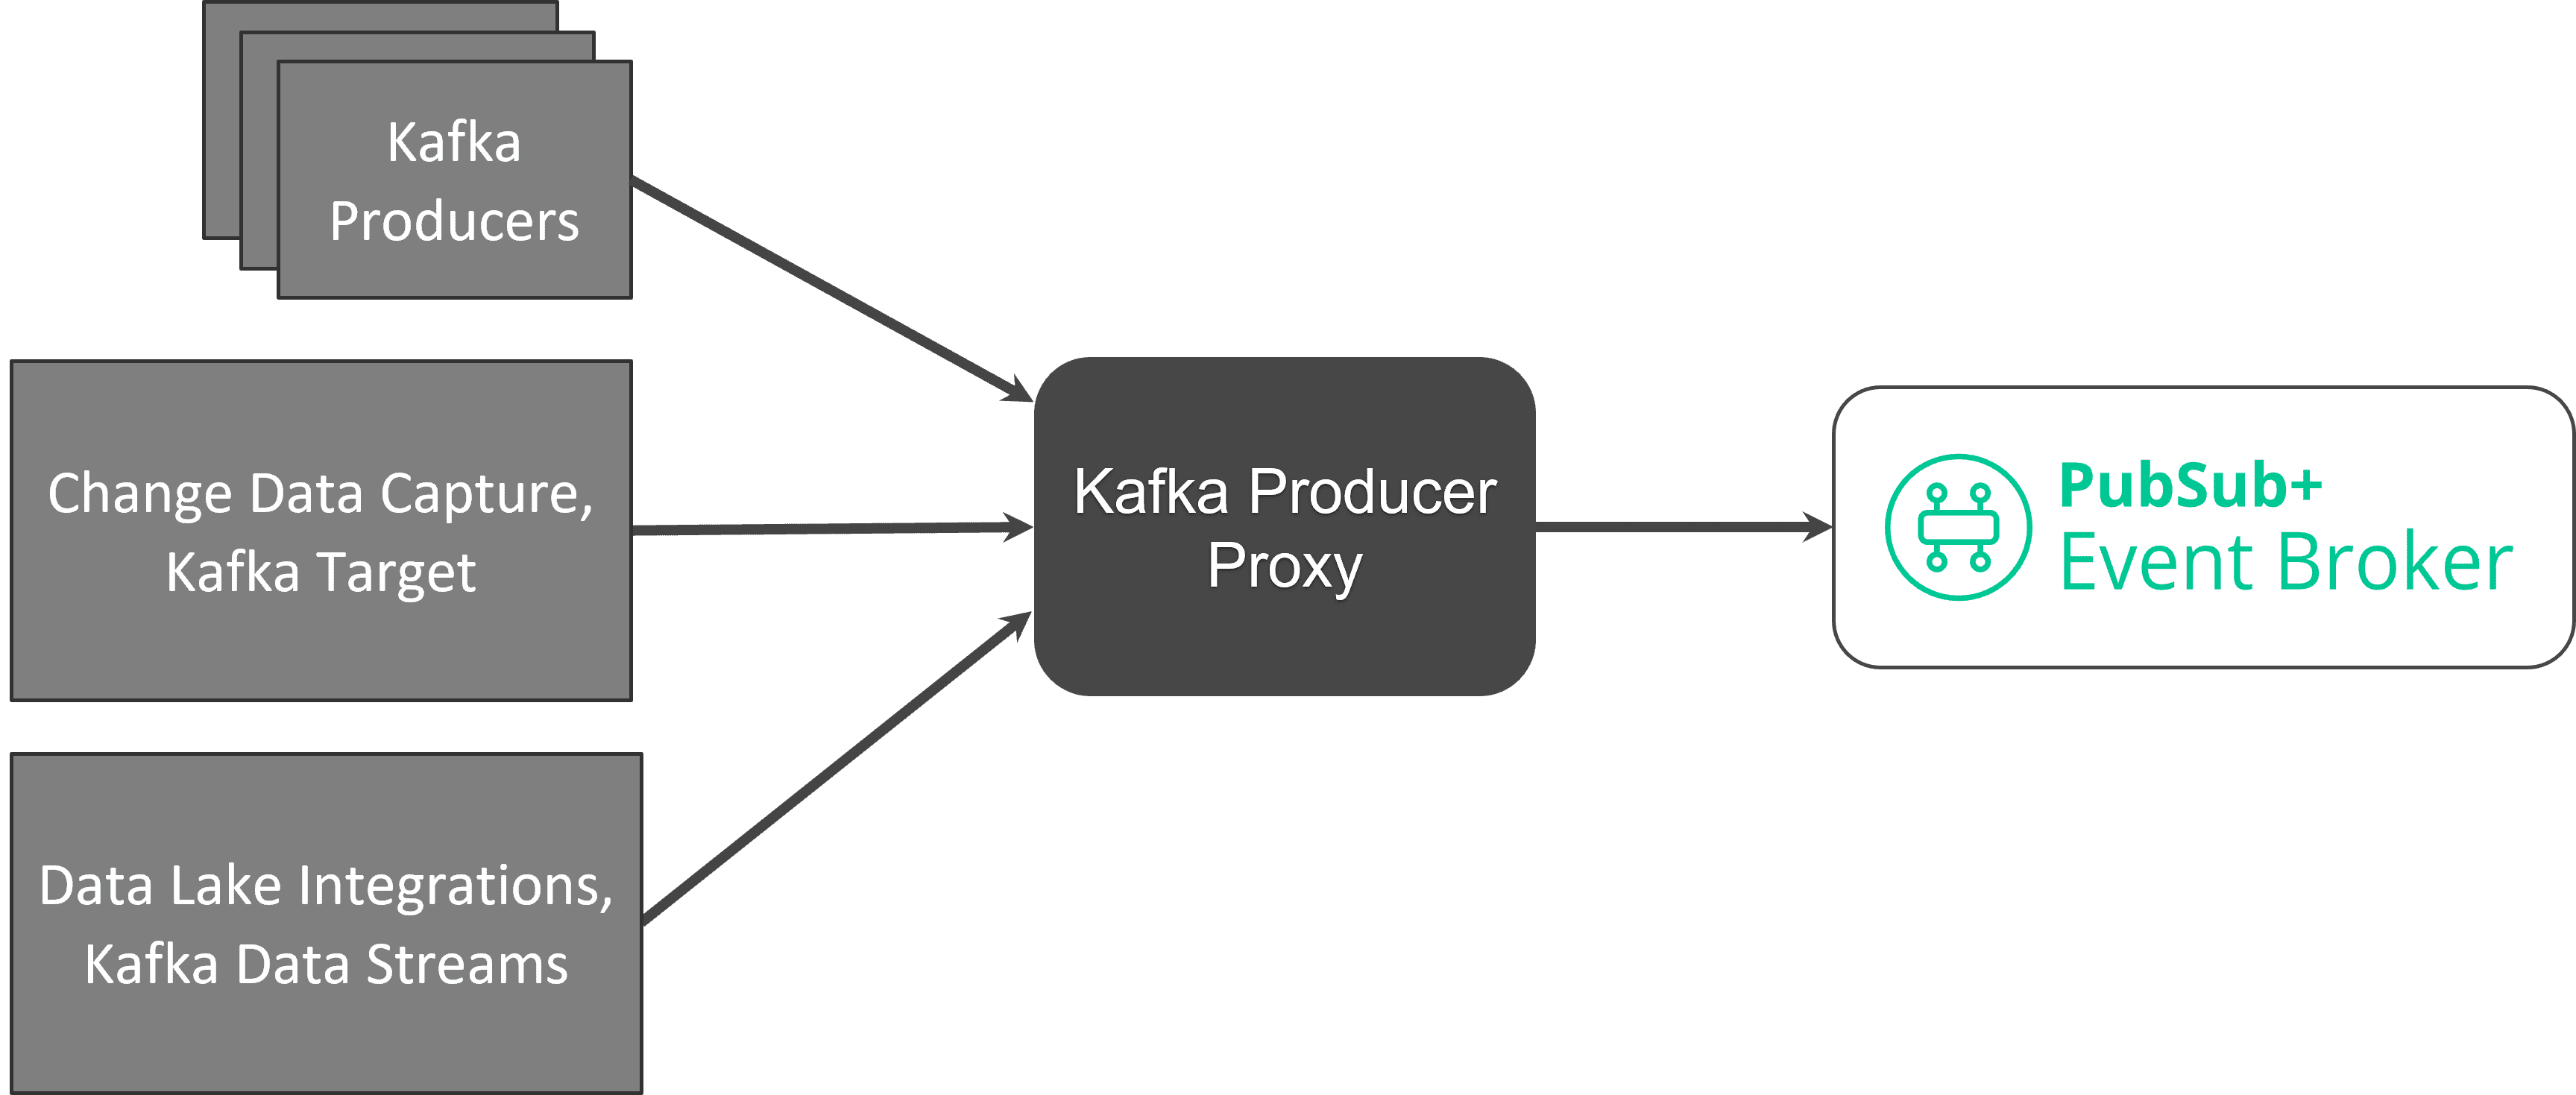 high level diagram of how Kafka streams flow from producers, CDC and data lakes to PubSub+ Event Broker via Kafka Producer Proxy